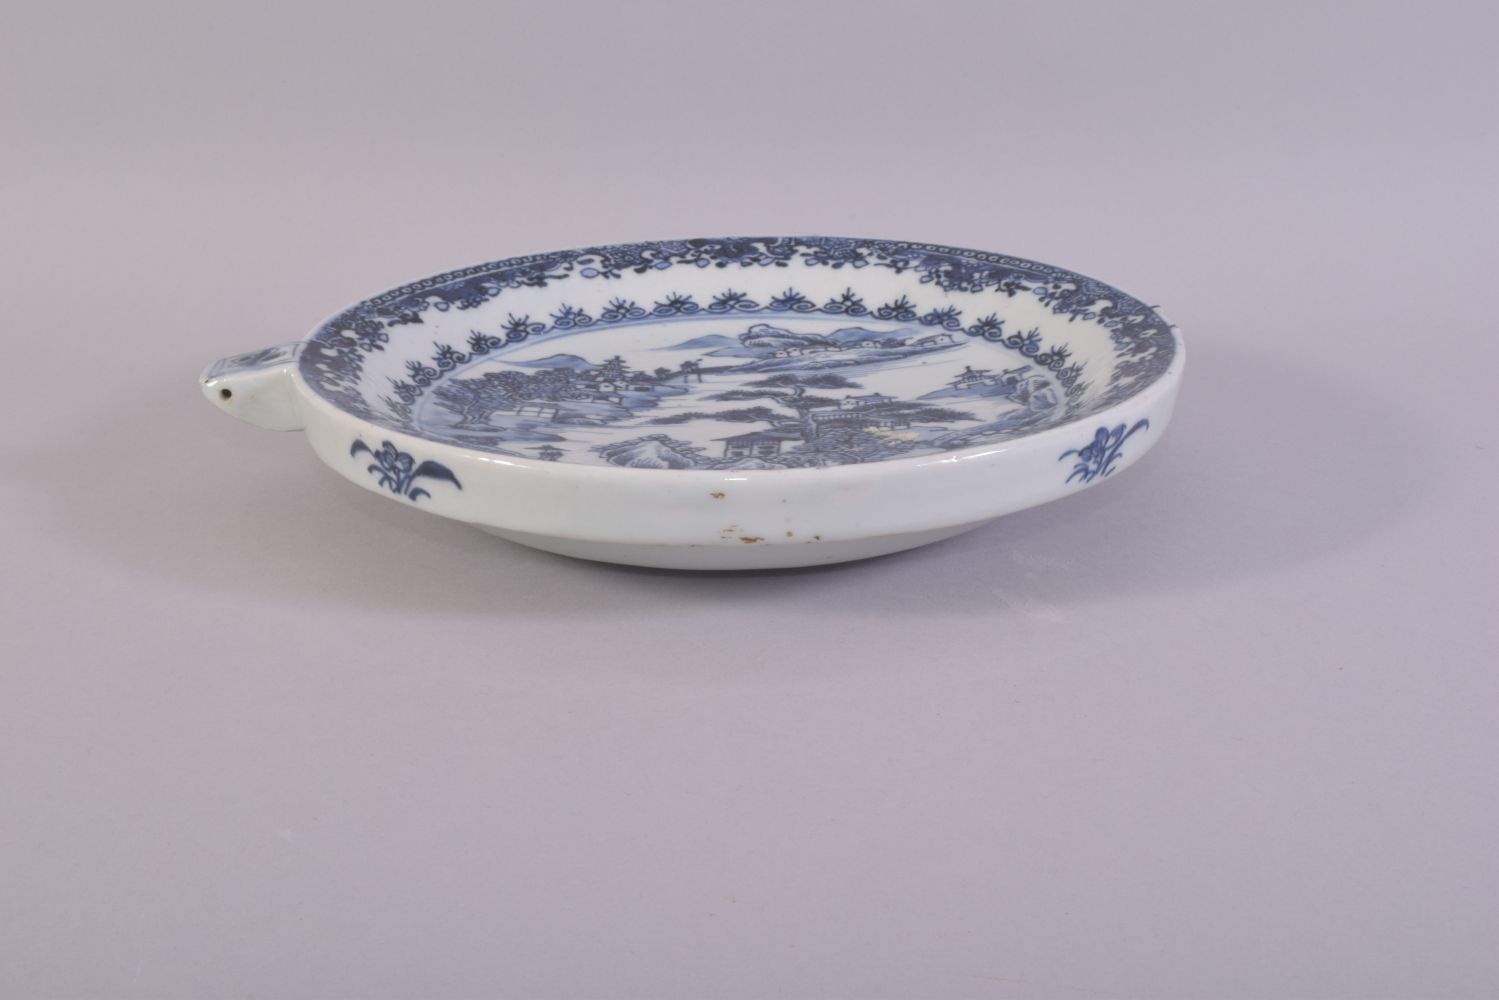 A CHINESE BLUE AND WHITE PORCELAIN WARMING DISH, painted with a landscape scene, 23.5cm. - Image 2 of 3